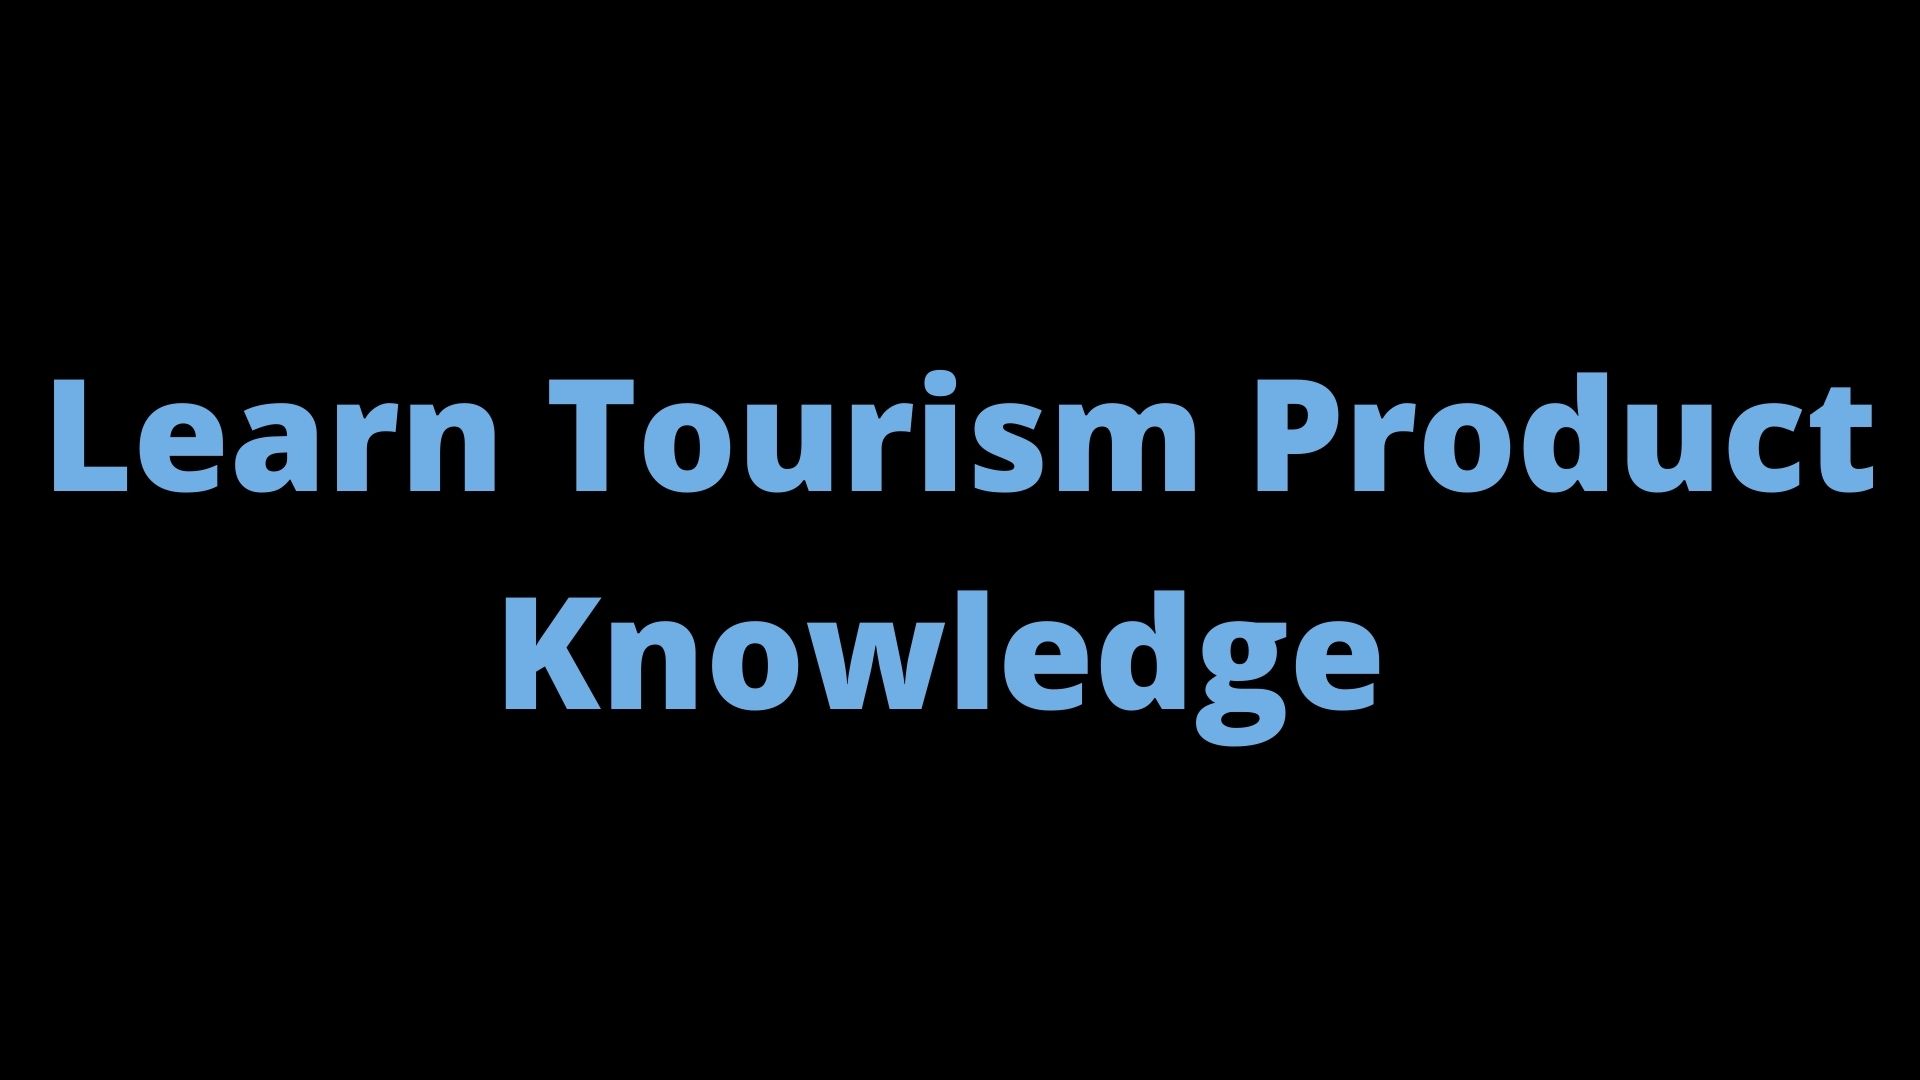 Learn Tourism Product Knowledge